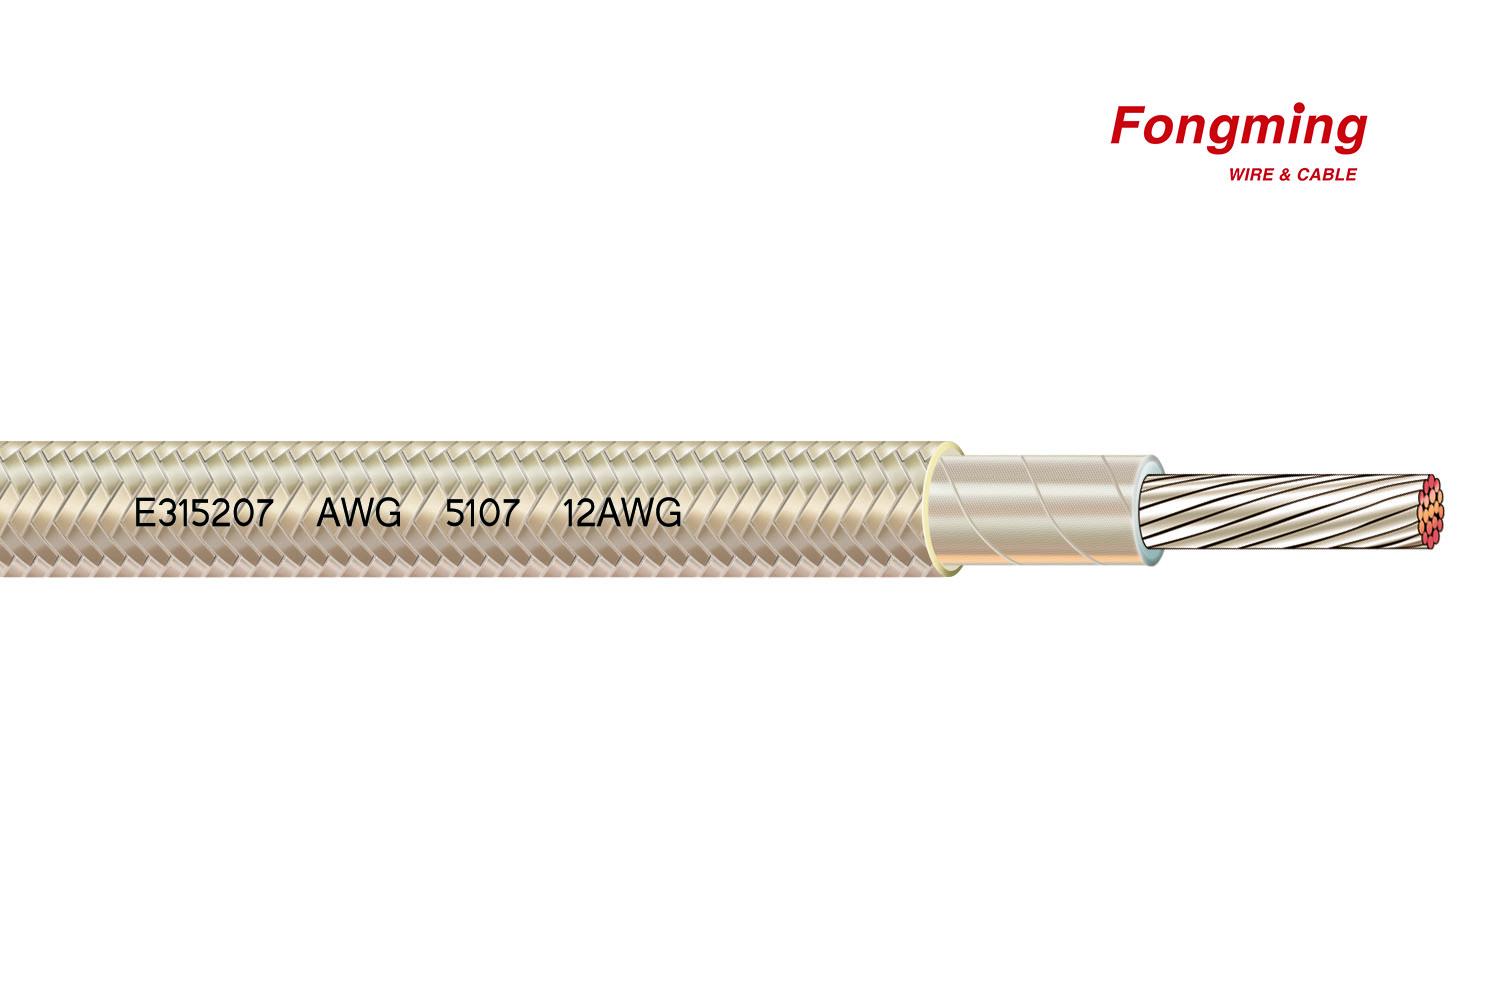 Yangzhou Fongming Cable: Do you really understand UL certification?